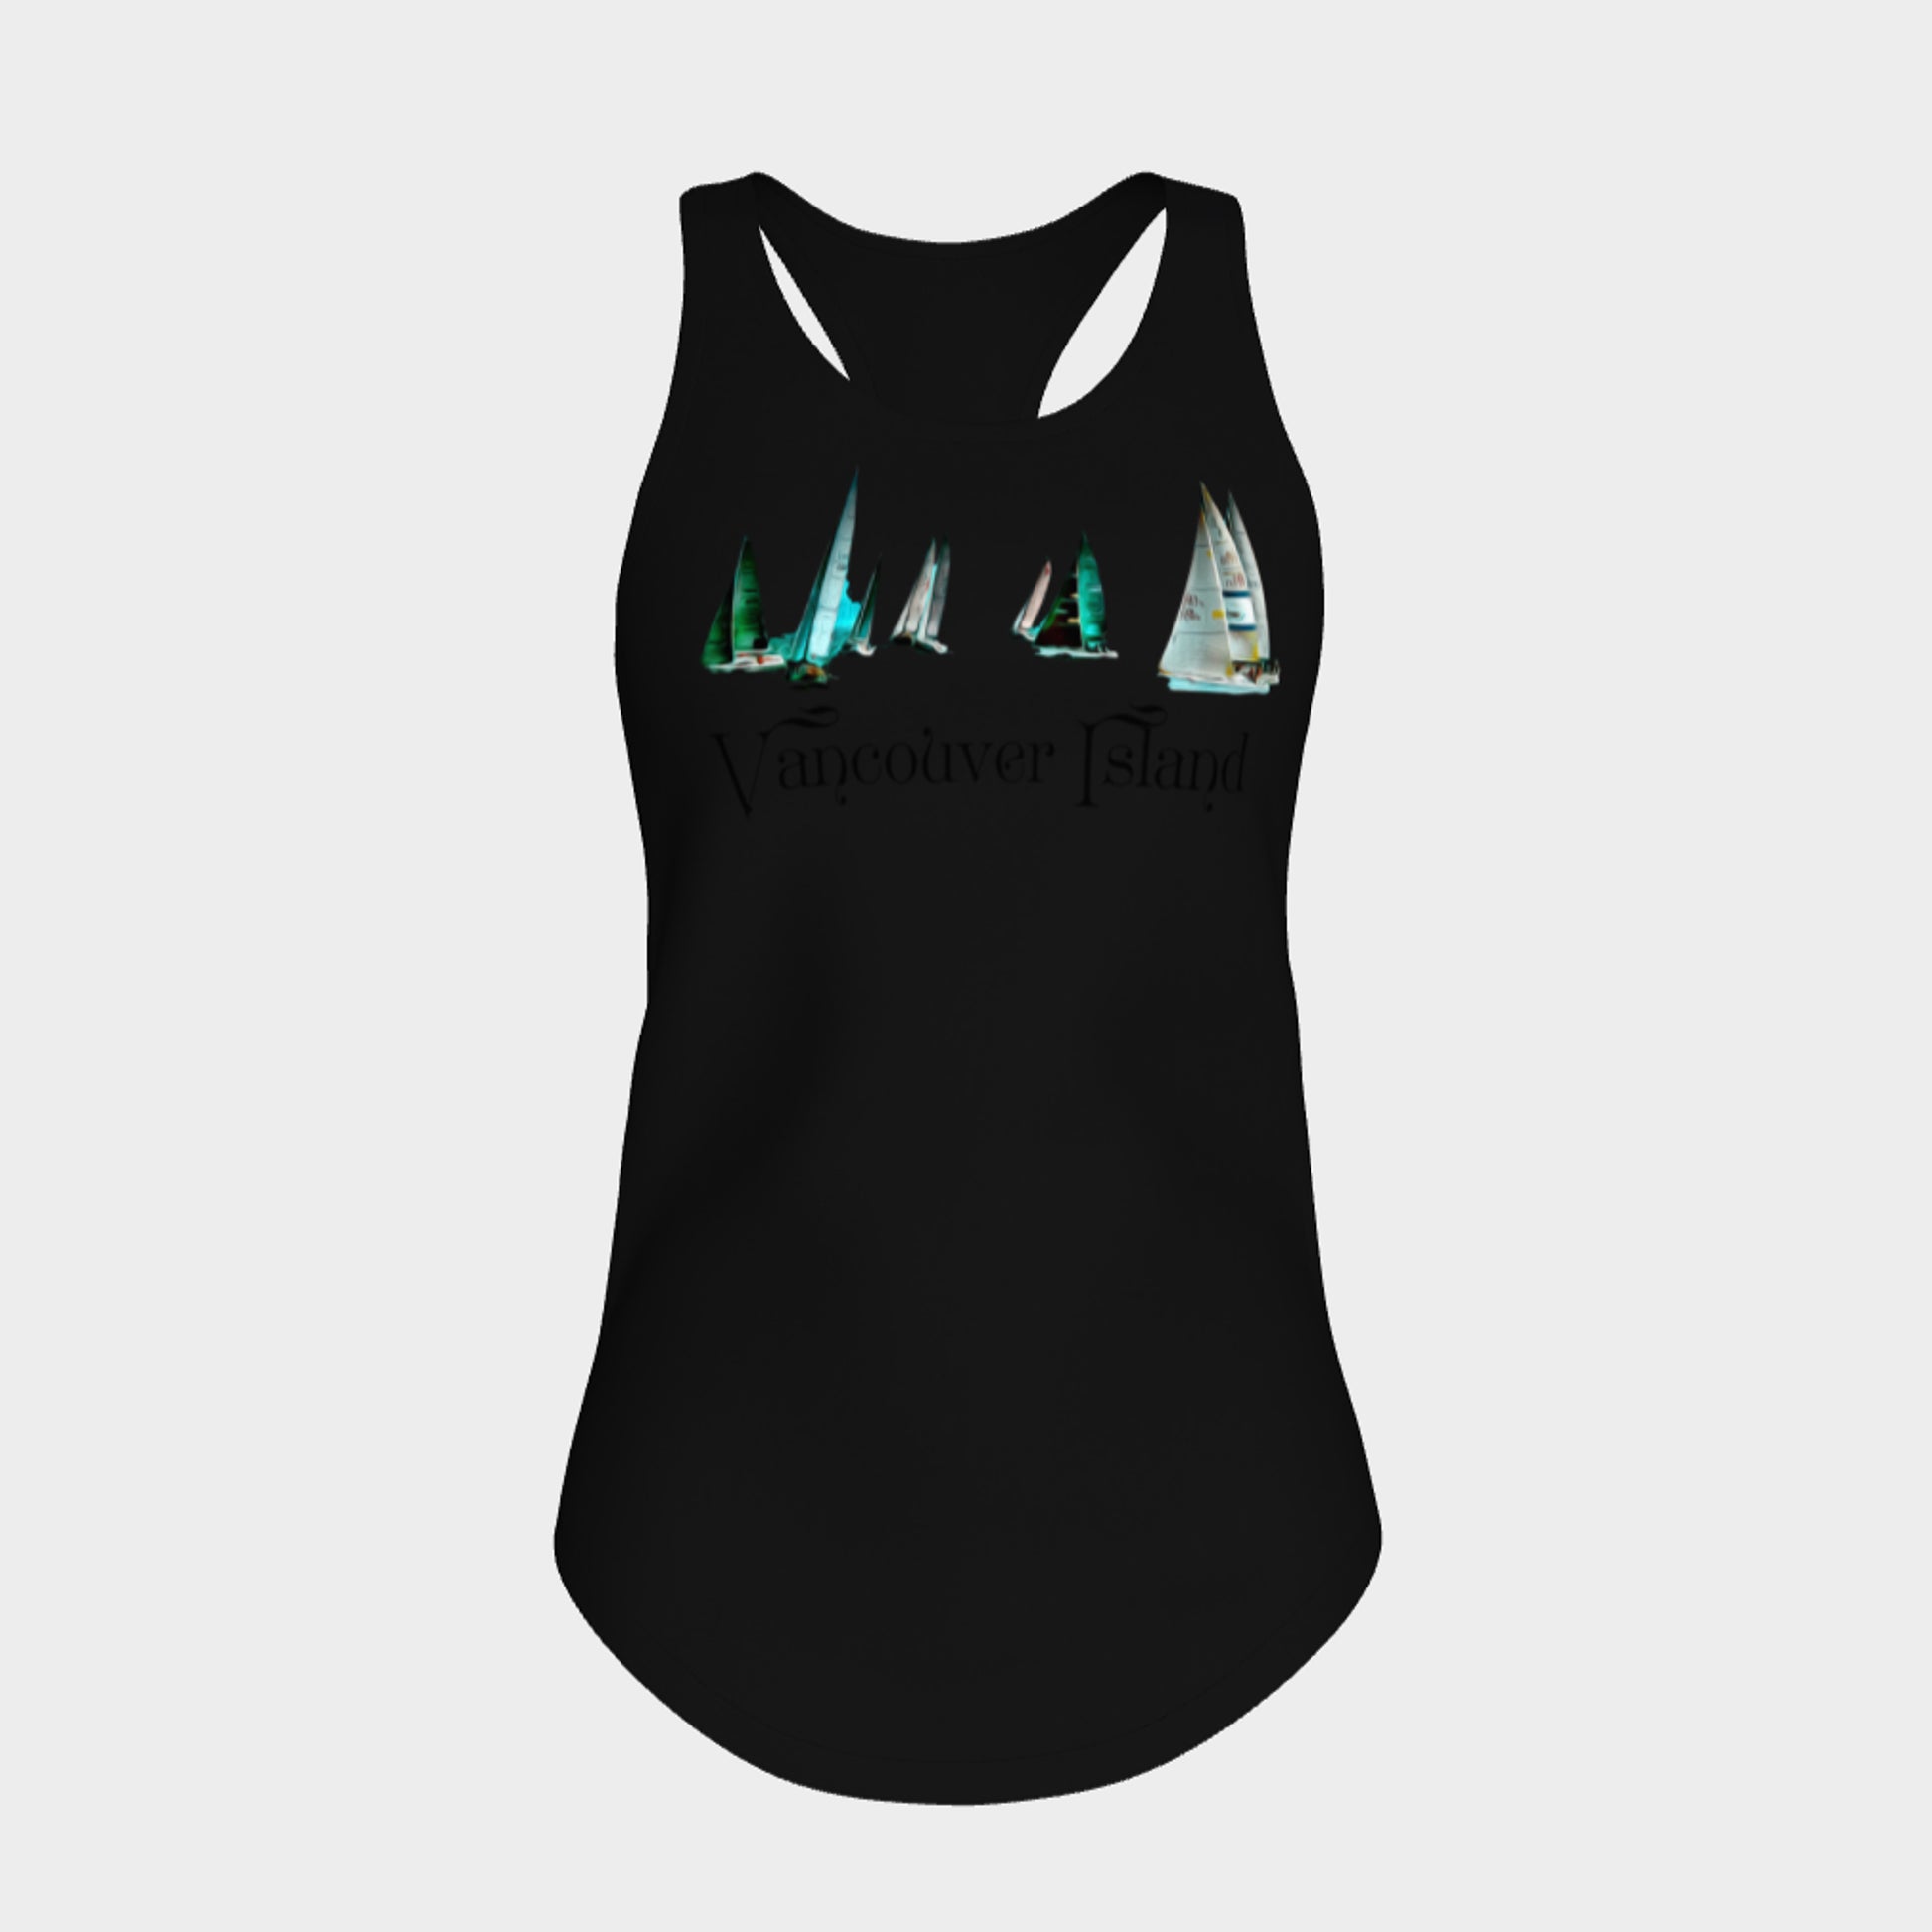 Sail Away Vancouver Island Racerback Tank Top  Excellent choice for the summer or for working out.   Made from 60% spun cotton and 40% poly for a mix of comfort and performance, you get it all (including my photography and digital art) with this custom printed racerback tank top.   Van Isle Goddess Next Level racerback tank top will quickly become you go-to tank top because of the super comfy fit!